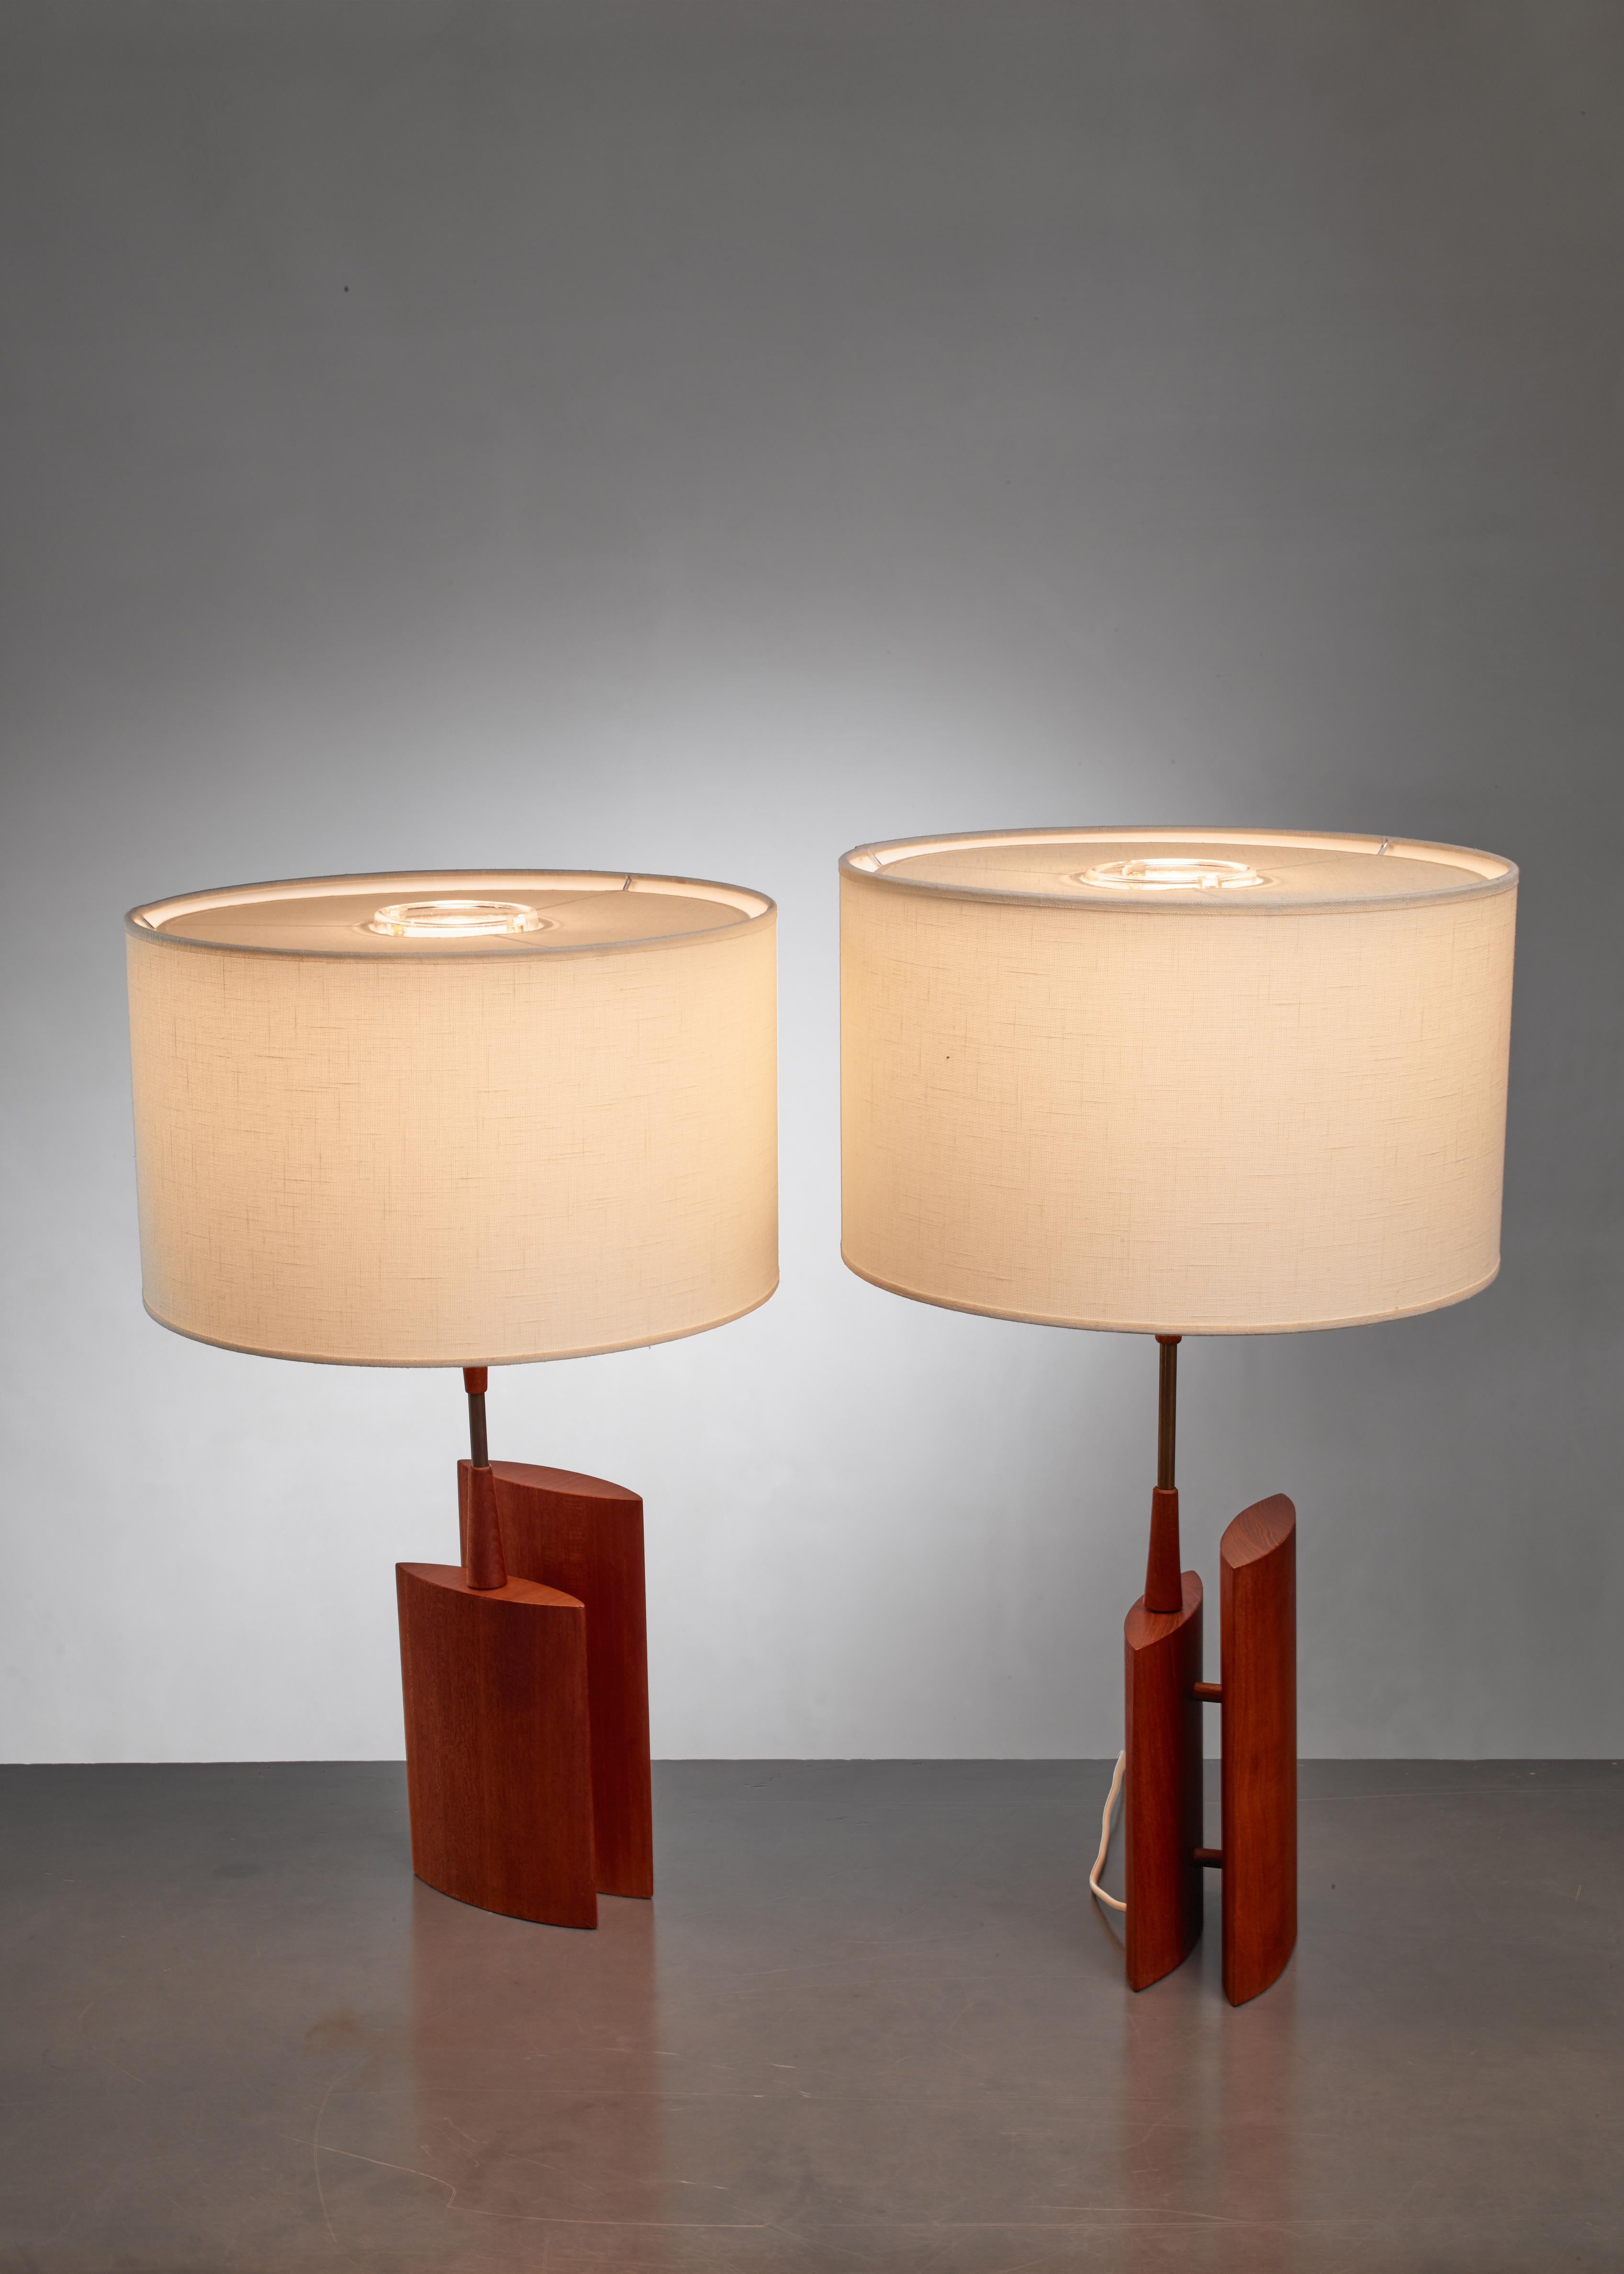 Scandinavian Modern Pair of Table Lamps with Two Ellipsoid Wood Parts and Brass Stem, Denmark, 1960s For Sale